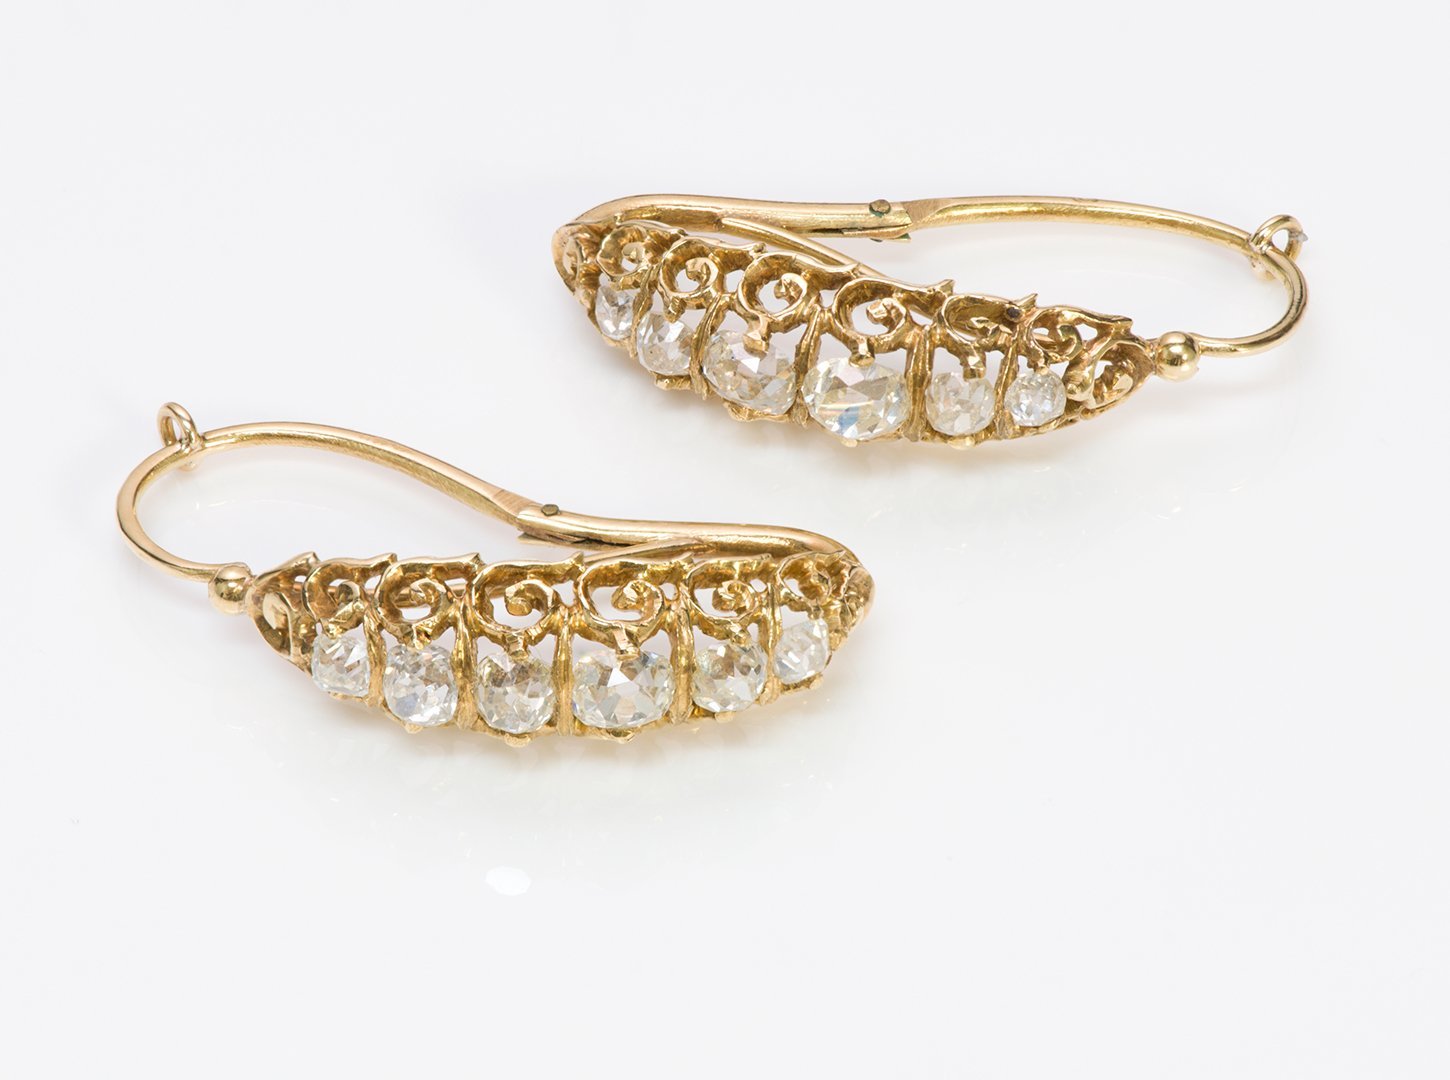 Antique Victorian Gold Diamond Hoop Earrings - DSF Antique Jewelry